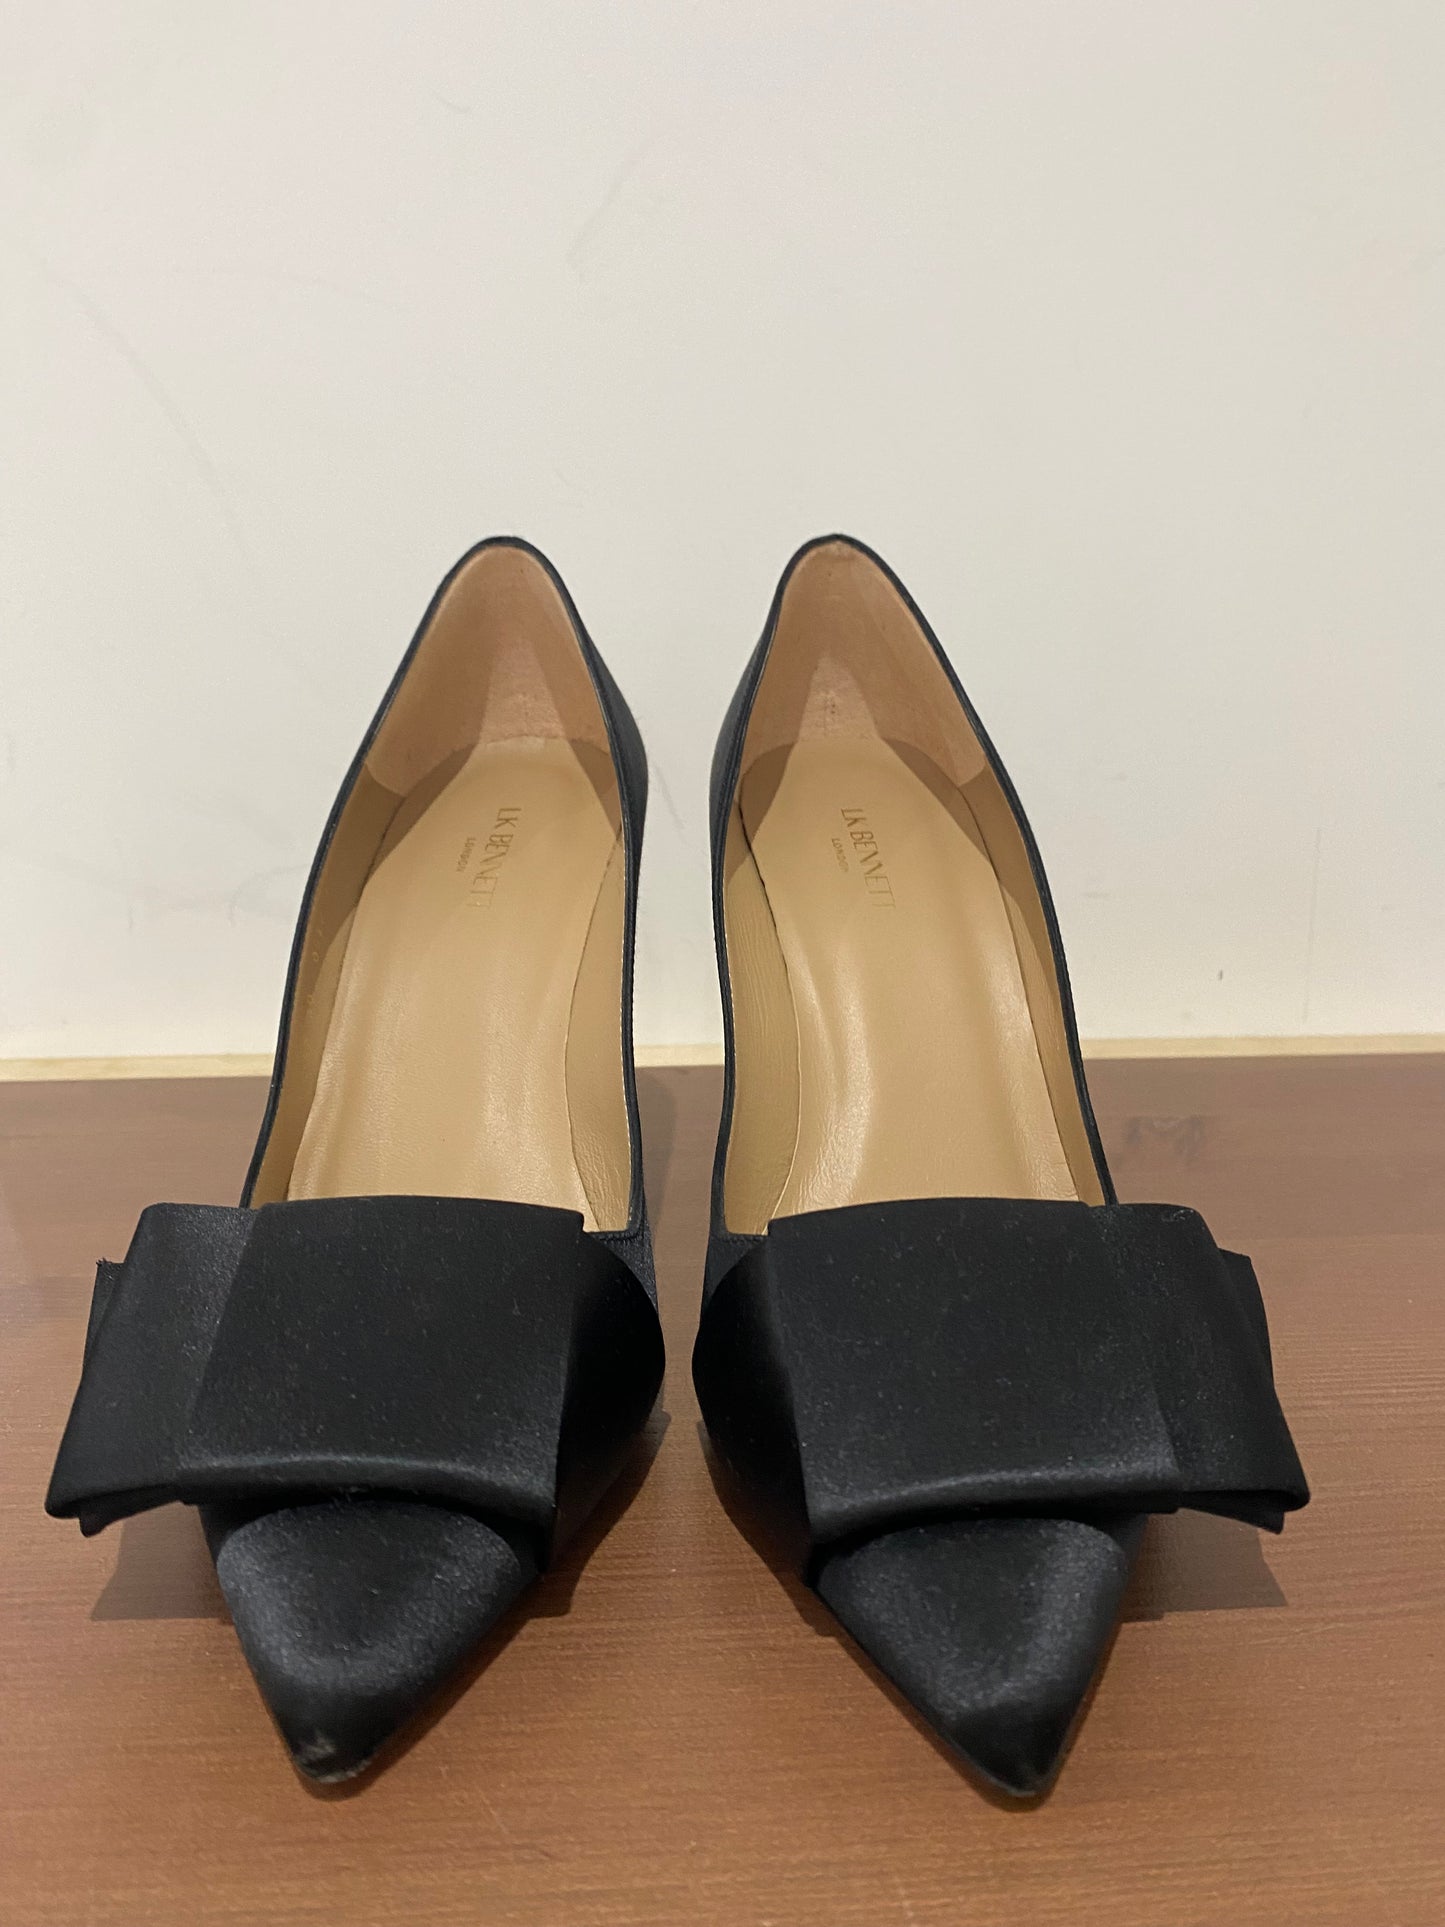 LK Bennett Black Fabric Shoes with Bow Detail Size 7